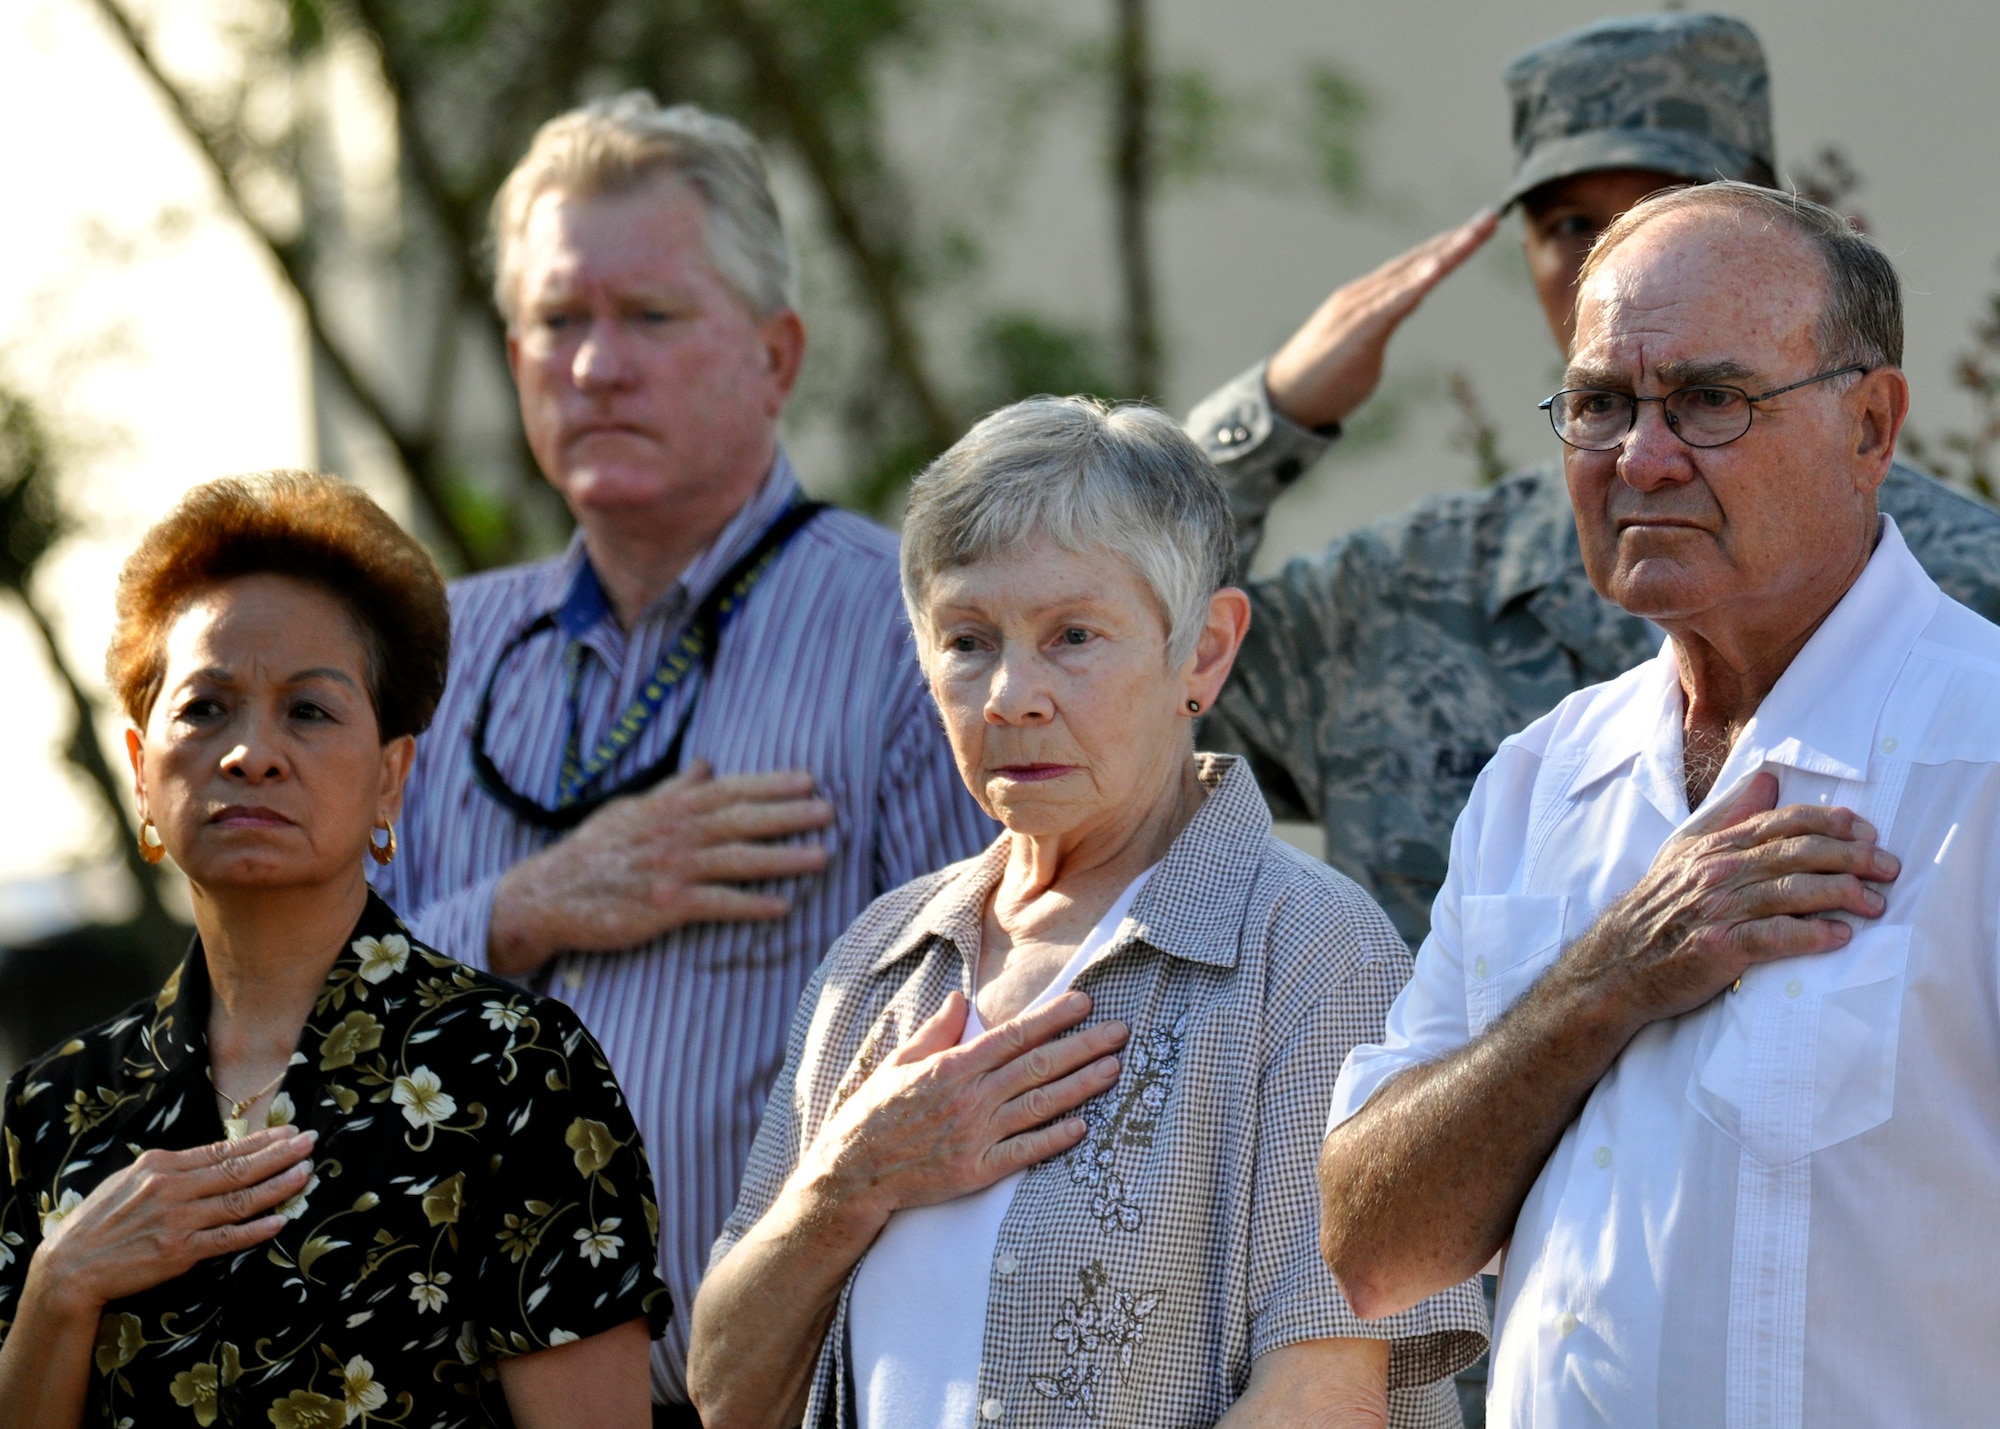 Family members of the victims of the Khobar Towers bombing listen to the National Anthem during a ceremony, which marked the 14th anniversary of the tragedy, June 25 at Eglin Air Force Base, Fla.  Almost 100 friends, family and current members of the 33rd Fighter Wing gathered for a remembrance ceremony near the memorial dedicated to the heroism of 12 Airmen lost. The 33rd FW suffered 105 wounded personnel and accounted for 12 of the 19 Airmen killed in the Khobar Towers terrorist attack June 25, 1996. (U.S. Air Force Photo/ Samuel King Jr.)